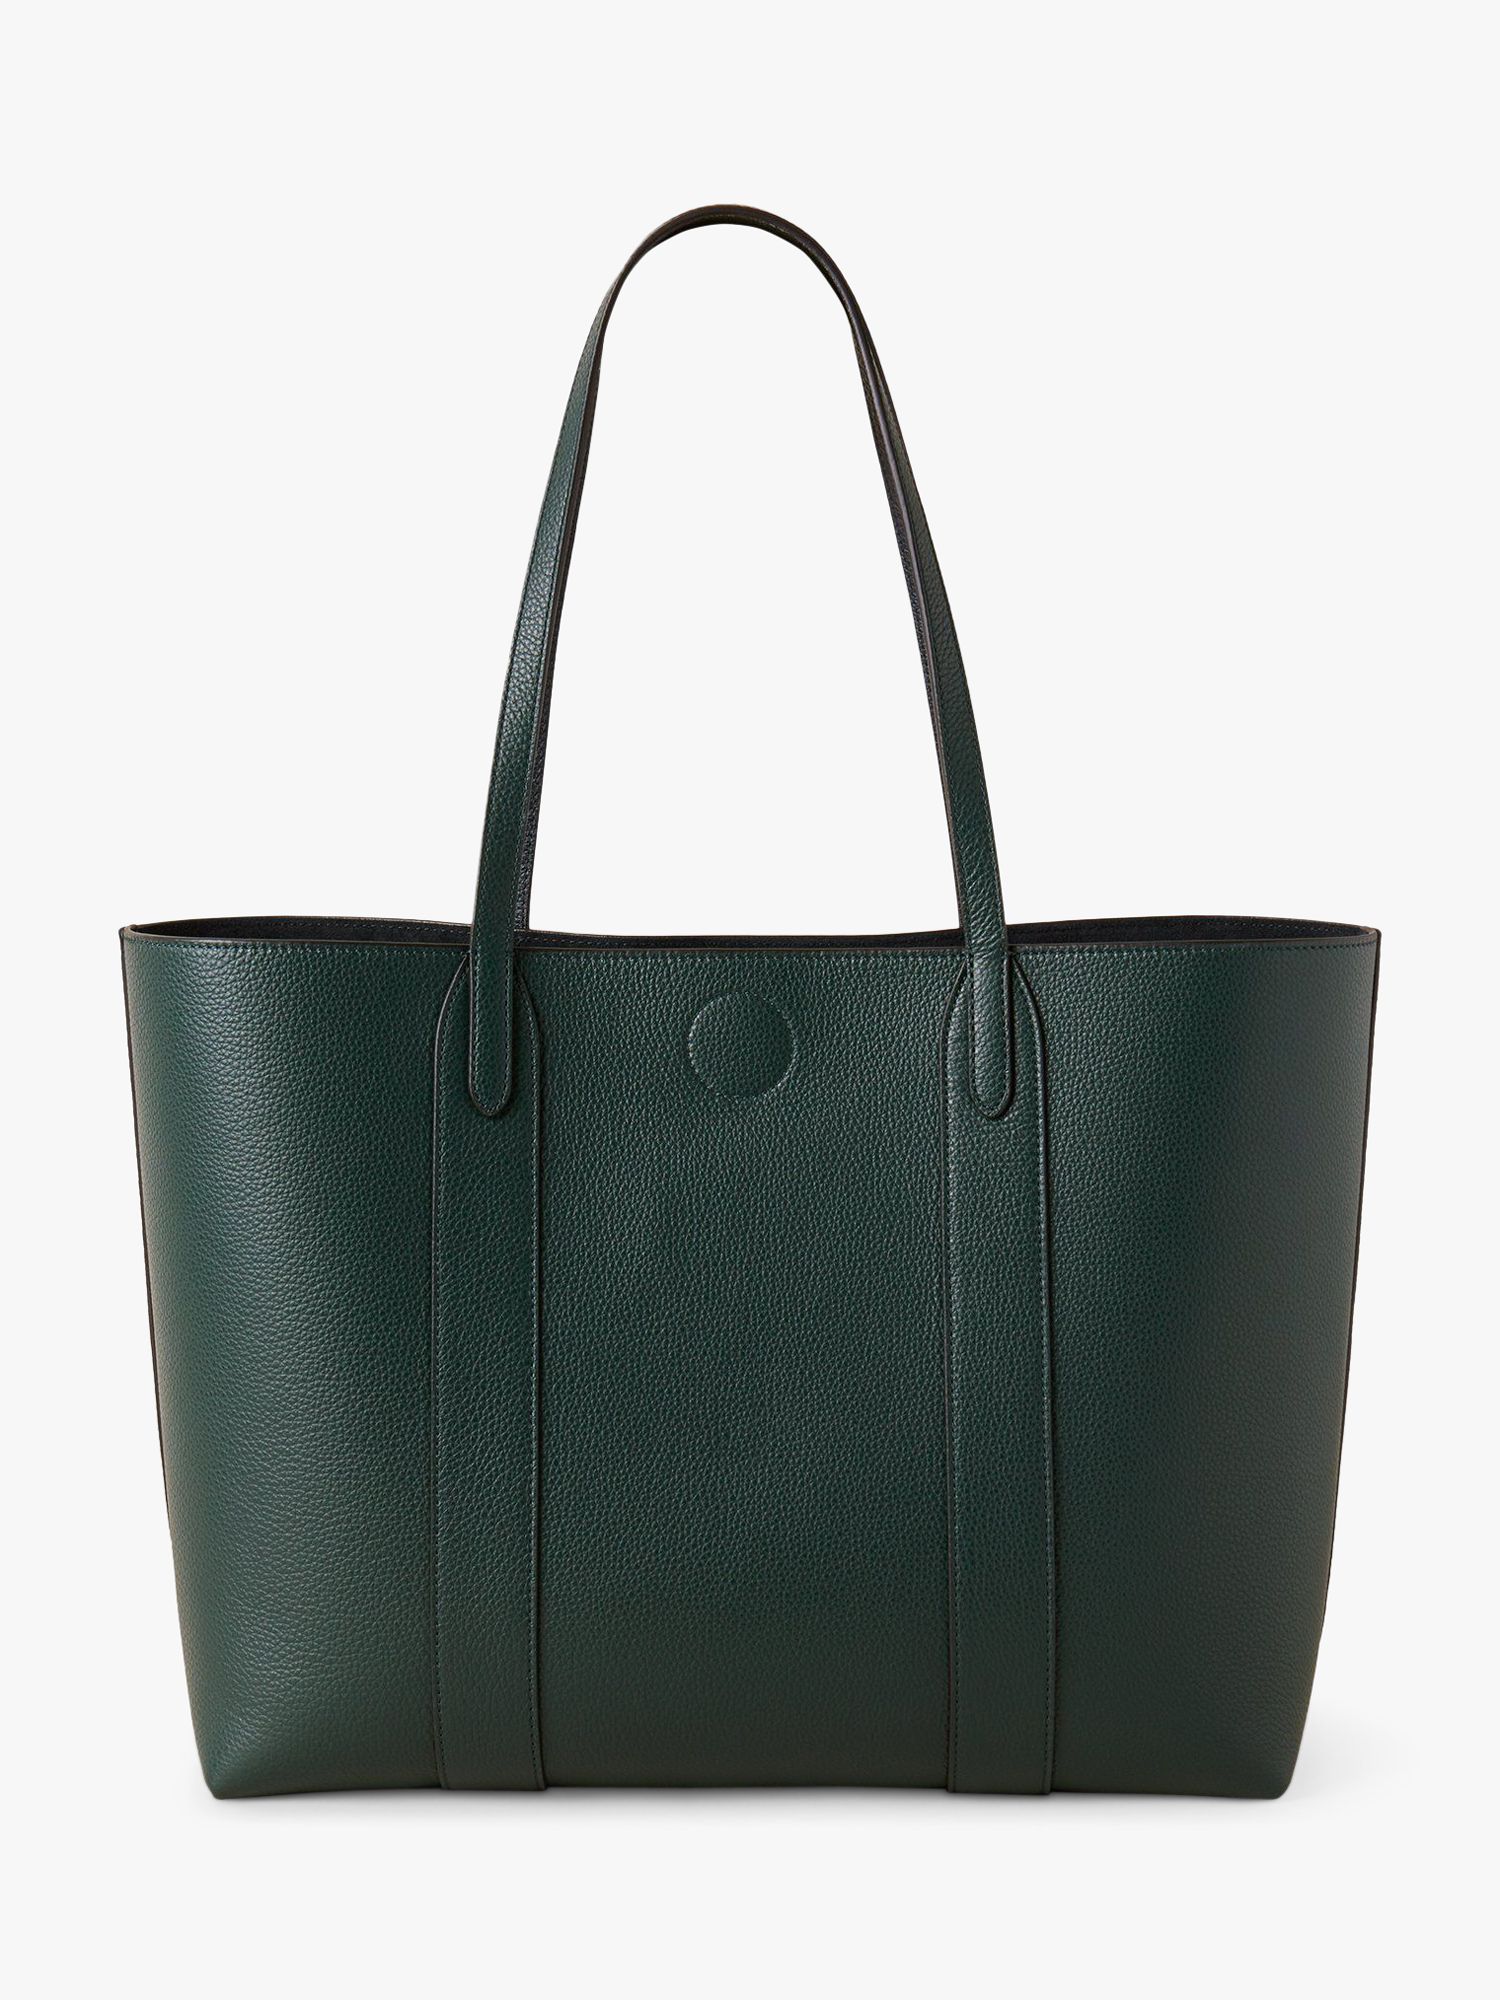 Mulberry Bayswater Small Classic Grain Leather Tote Bag, Mulberry Green ...